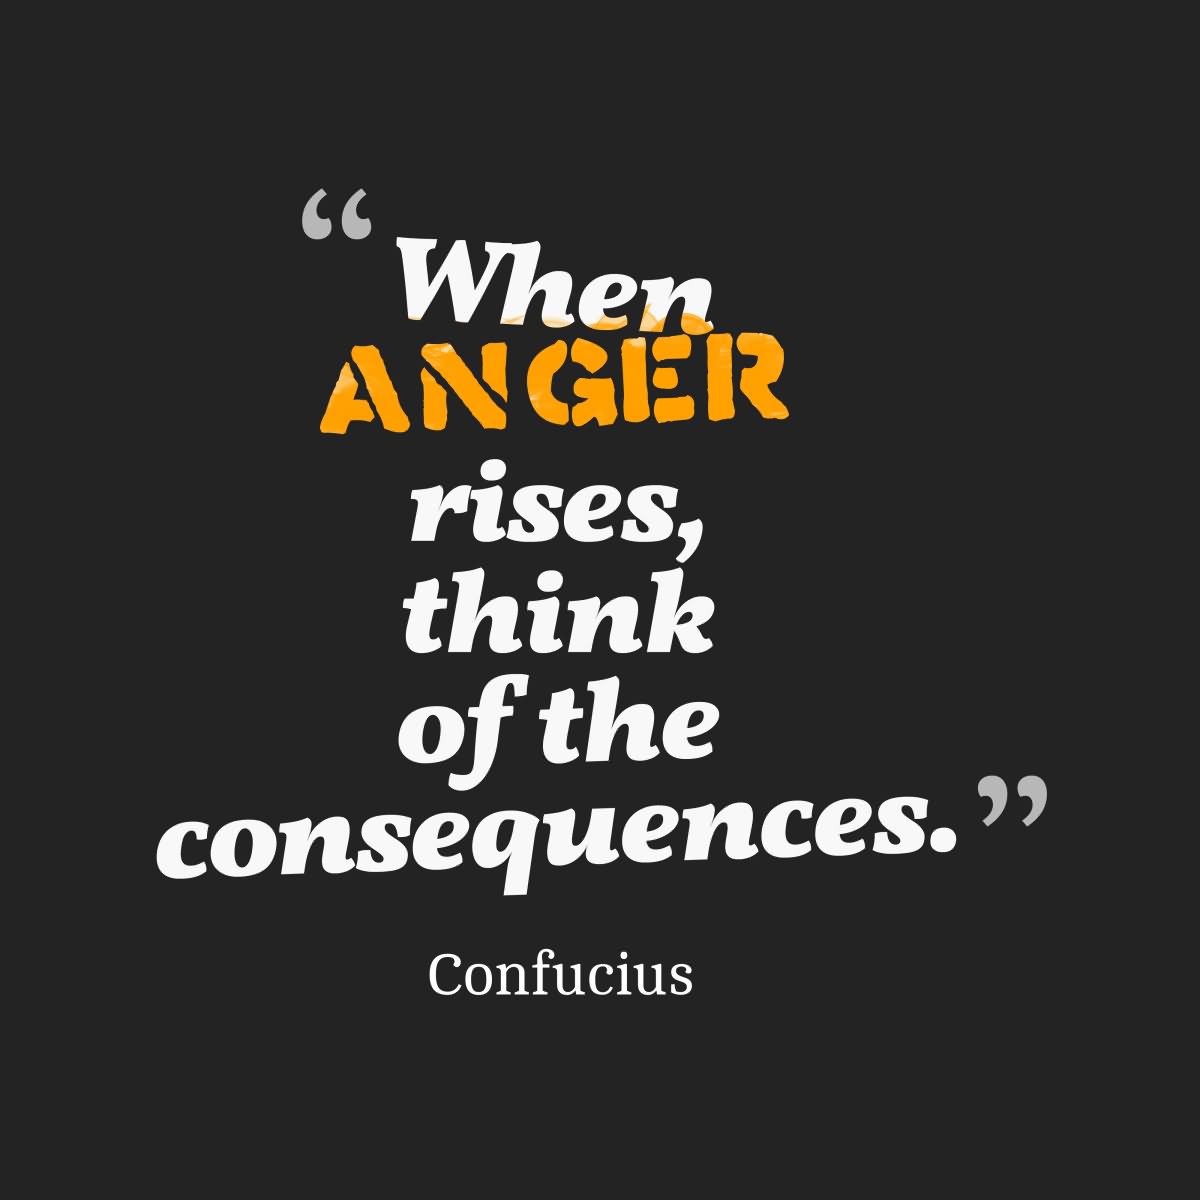 When anger rises, think of the consequences